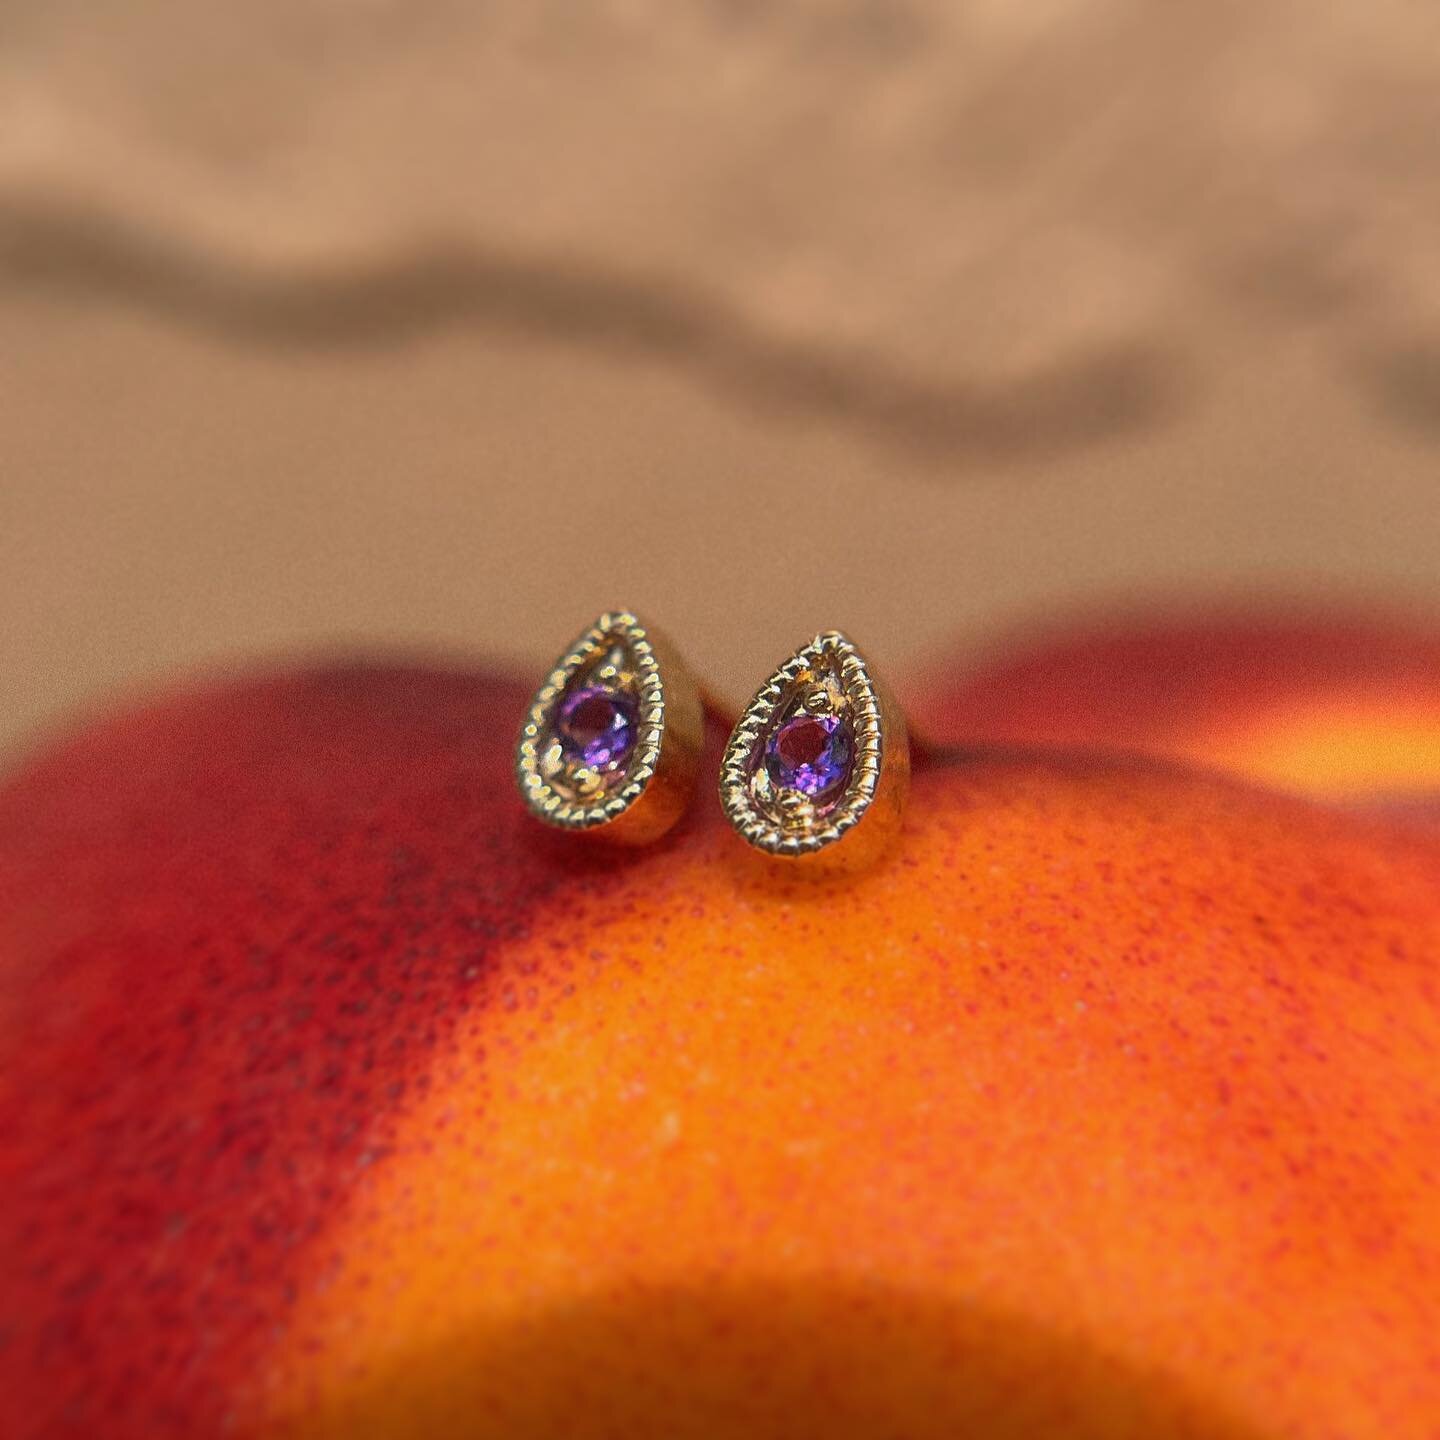 super cute strawberry seed earrings set with amethysts
🍇 💜 
14k gold and available to be customized with your choice of stone. check them out on the site or DM to order 😊

#thegoldenpeach #jewelry #goldjewelry #earrings #ringinspo #amethyst #earst